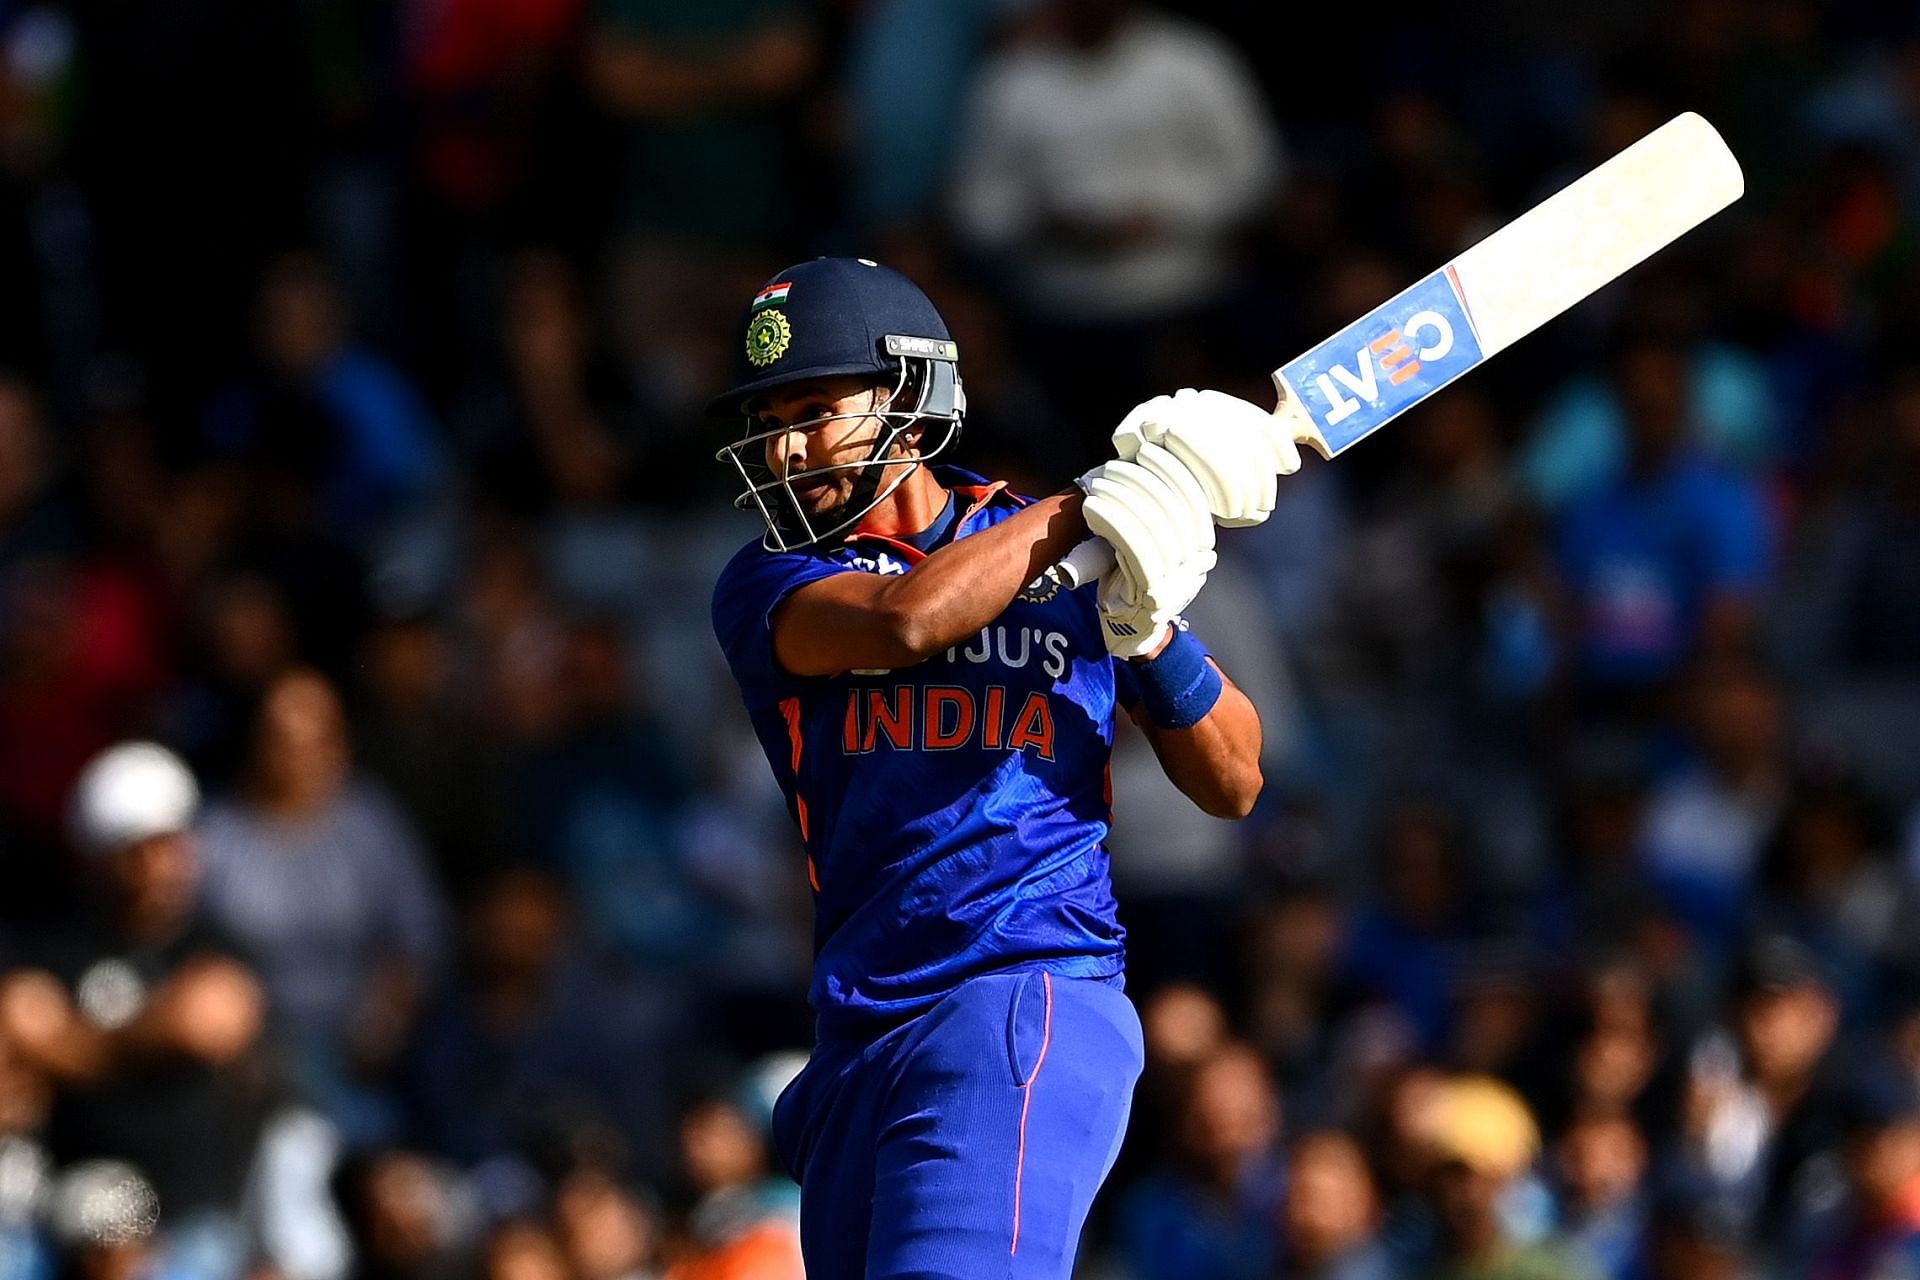 “He’s fit; that’s why we picked him in the squad” – Ajit Agarkar shares crucial update on Shreyas Iyer